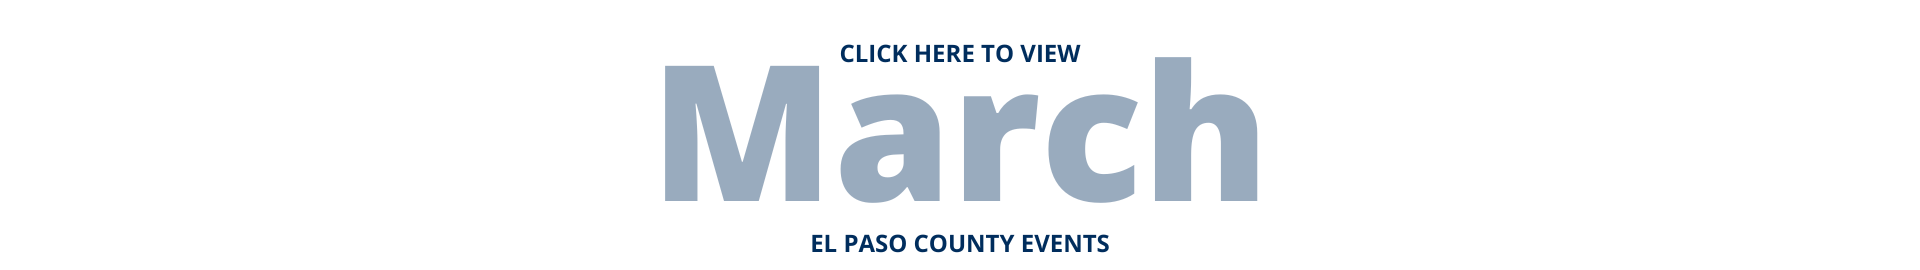 image of text: "Click Here to View" "March" "El Paso County Events"